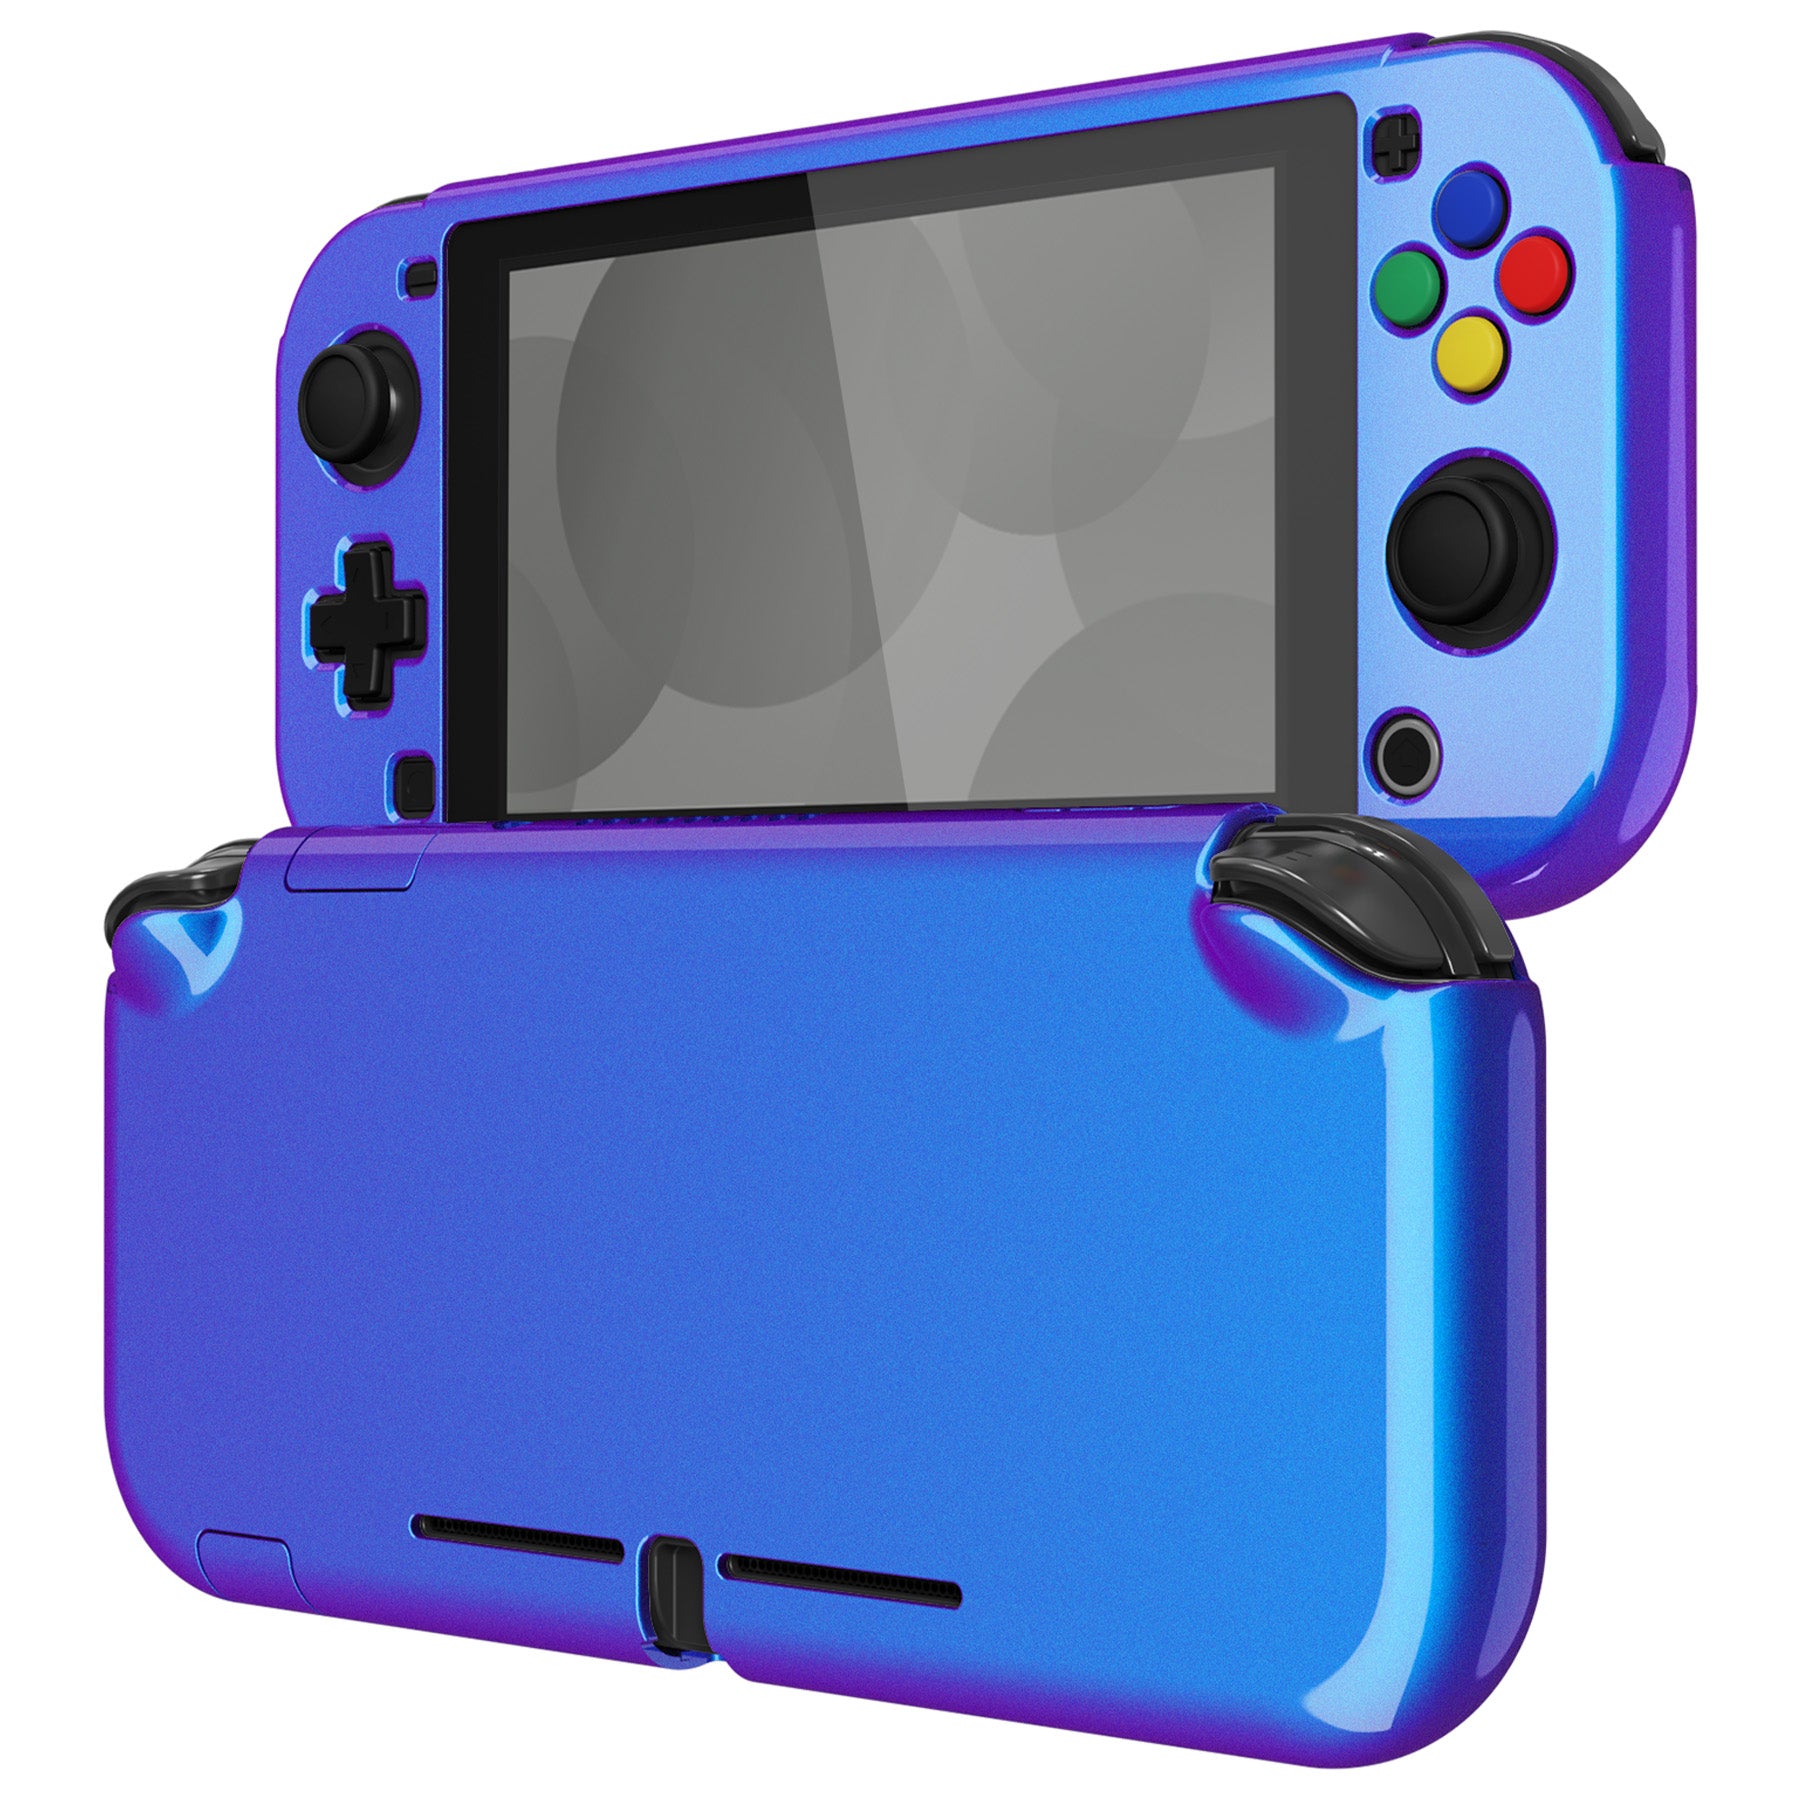 Full Cover Protective Sticker For NS Switch Lite Game Console